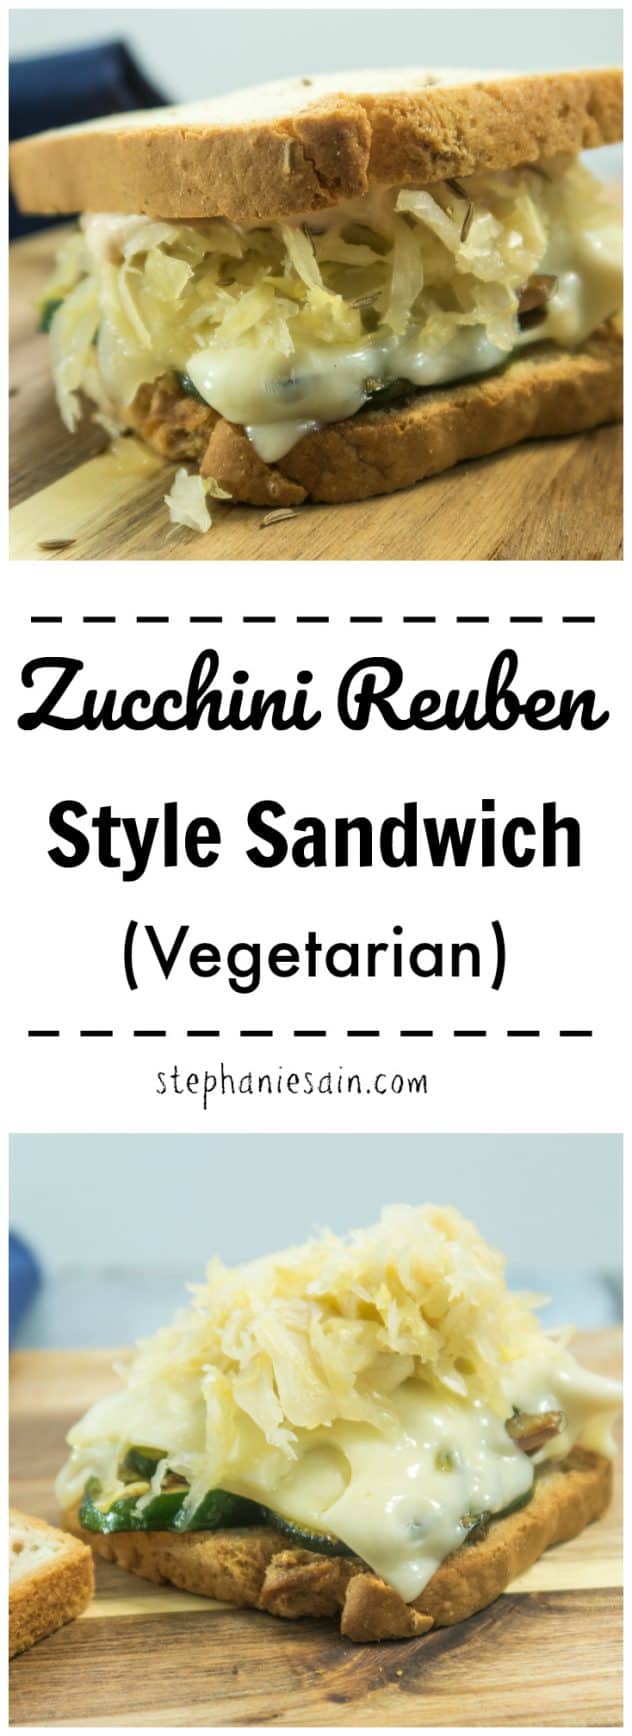 This Zucchini Reuben Style Sandwich is piled high with zucchini, red onion, Swiss cheese, & sauerkraut. Then layered between two slices of rye bread and a homemade thousand island dressing. Vegetarian & Gluten Free.